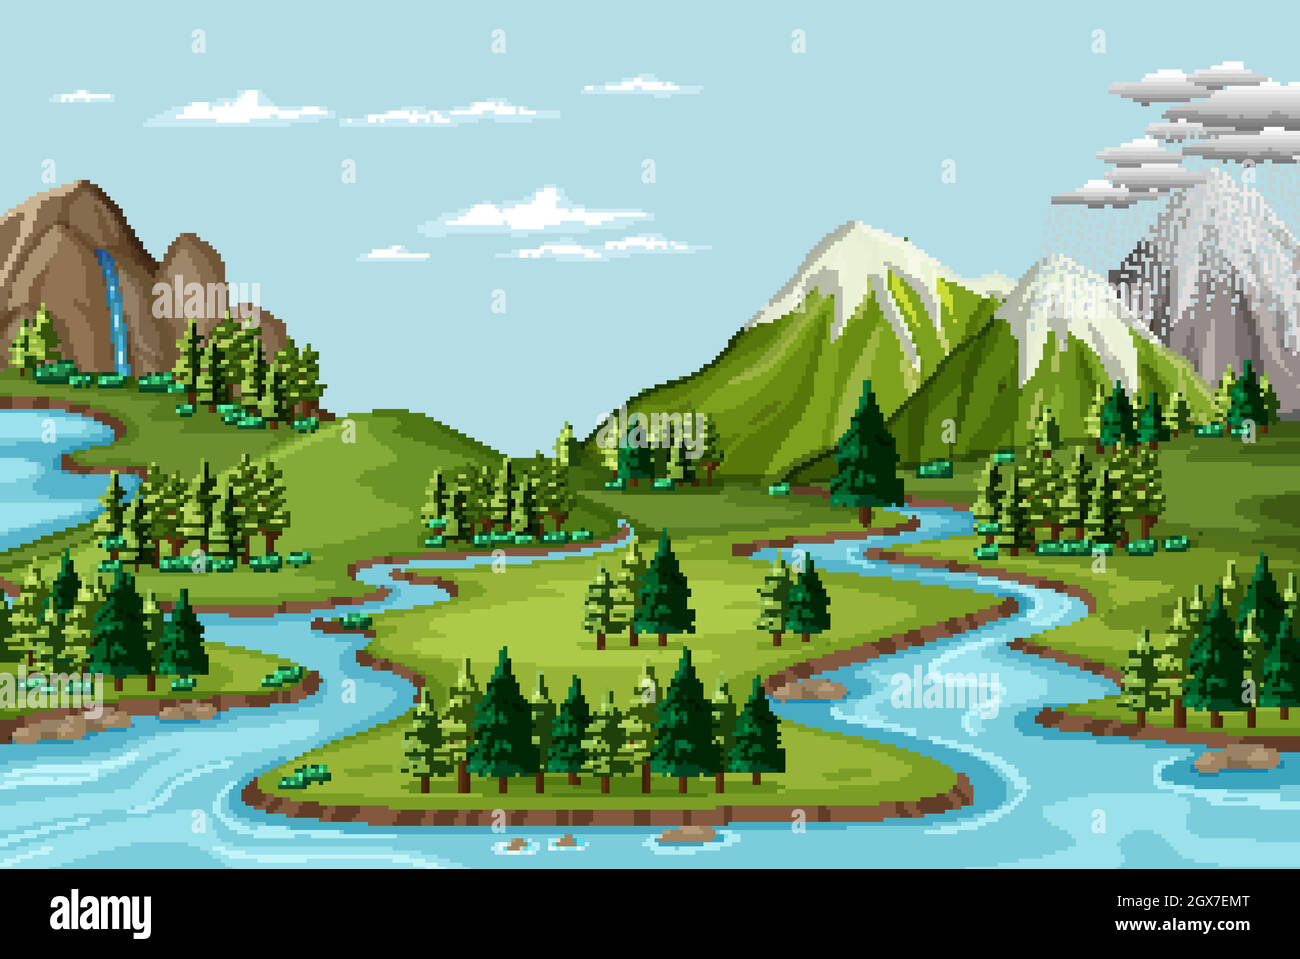 Bird's eye view with nature park landscape scene Stock Vector